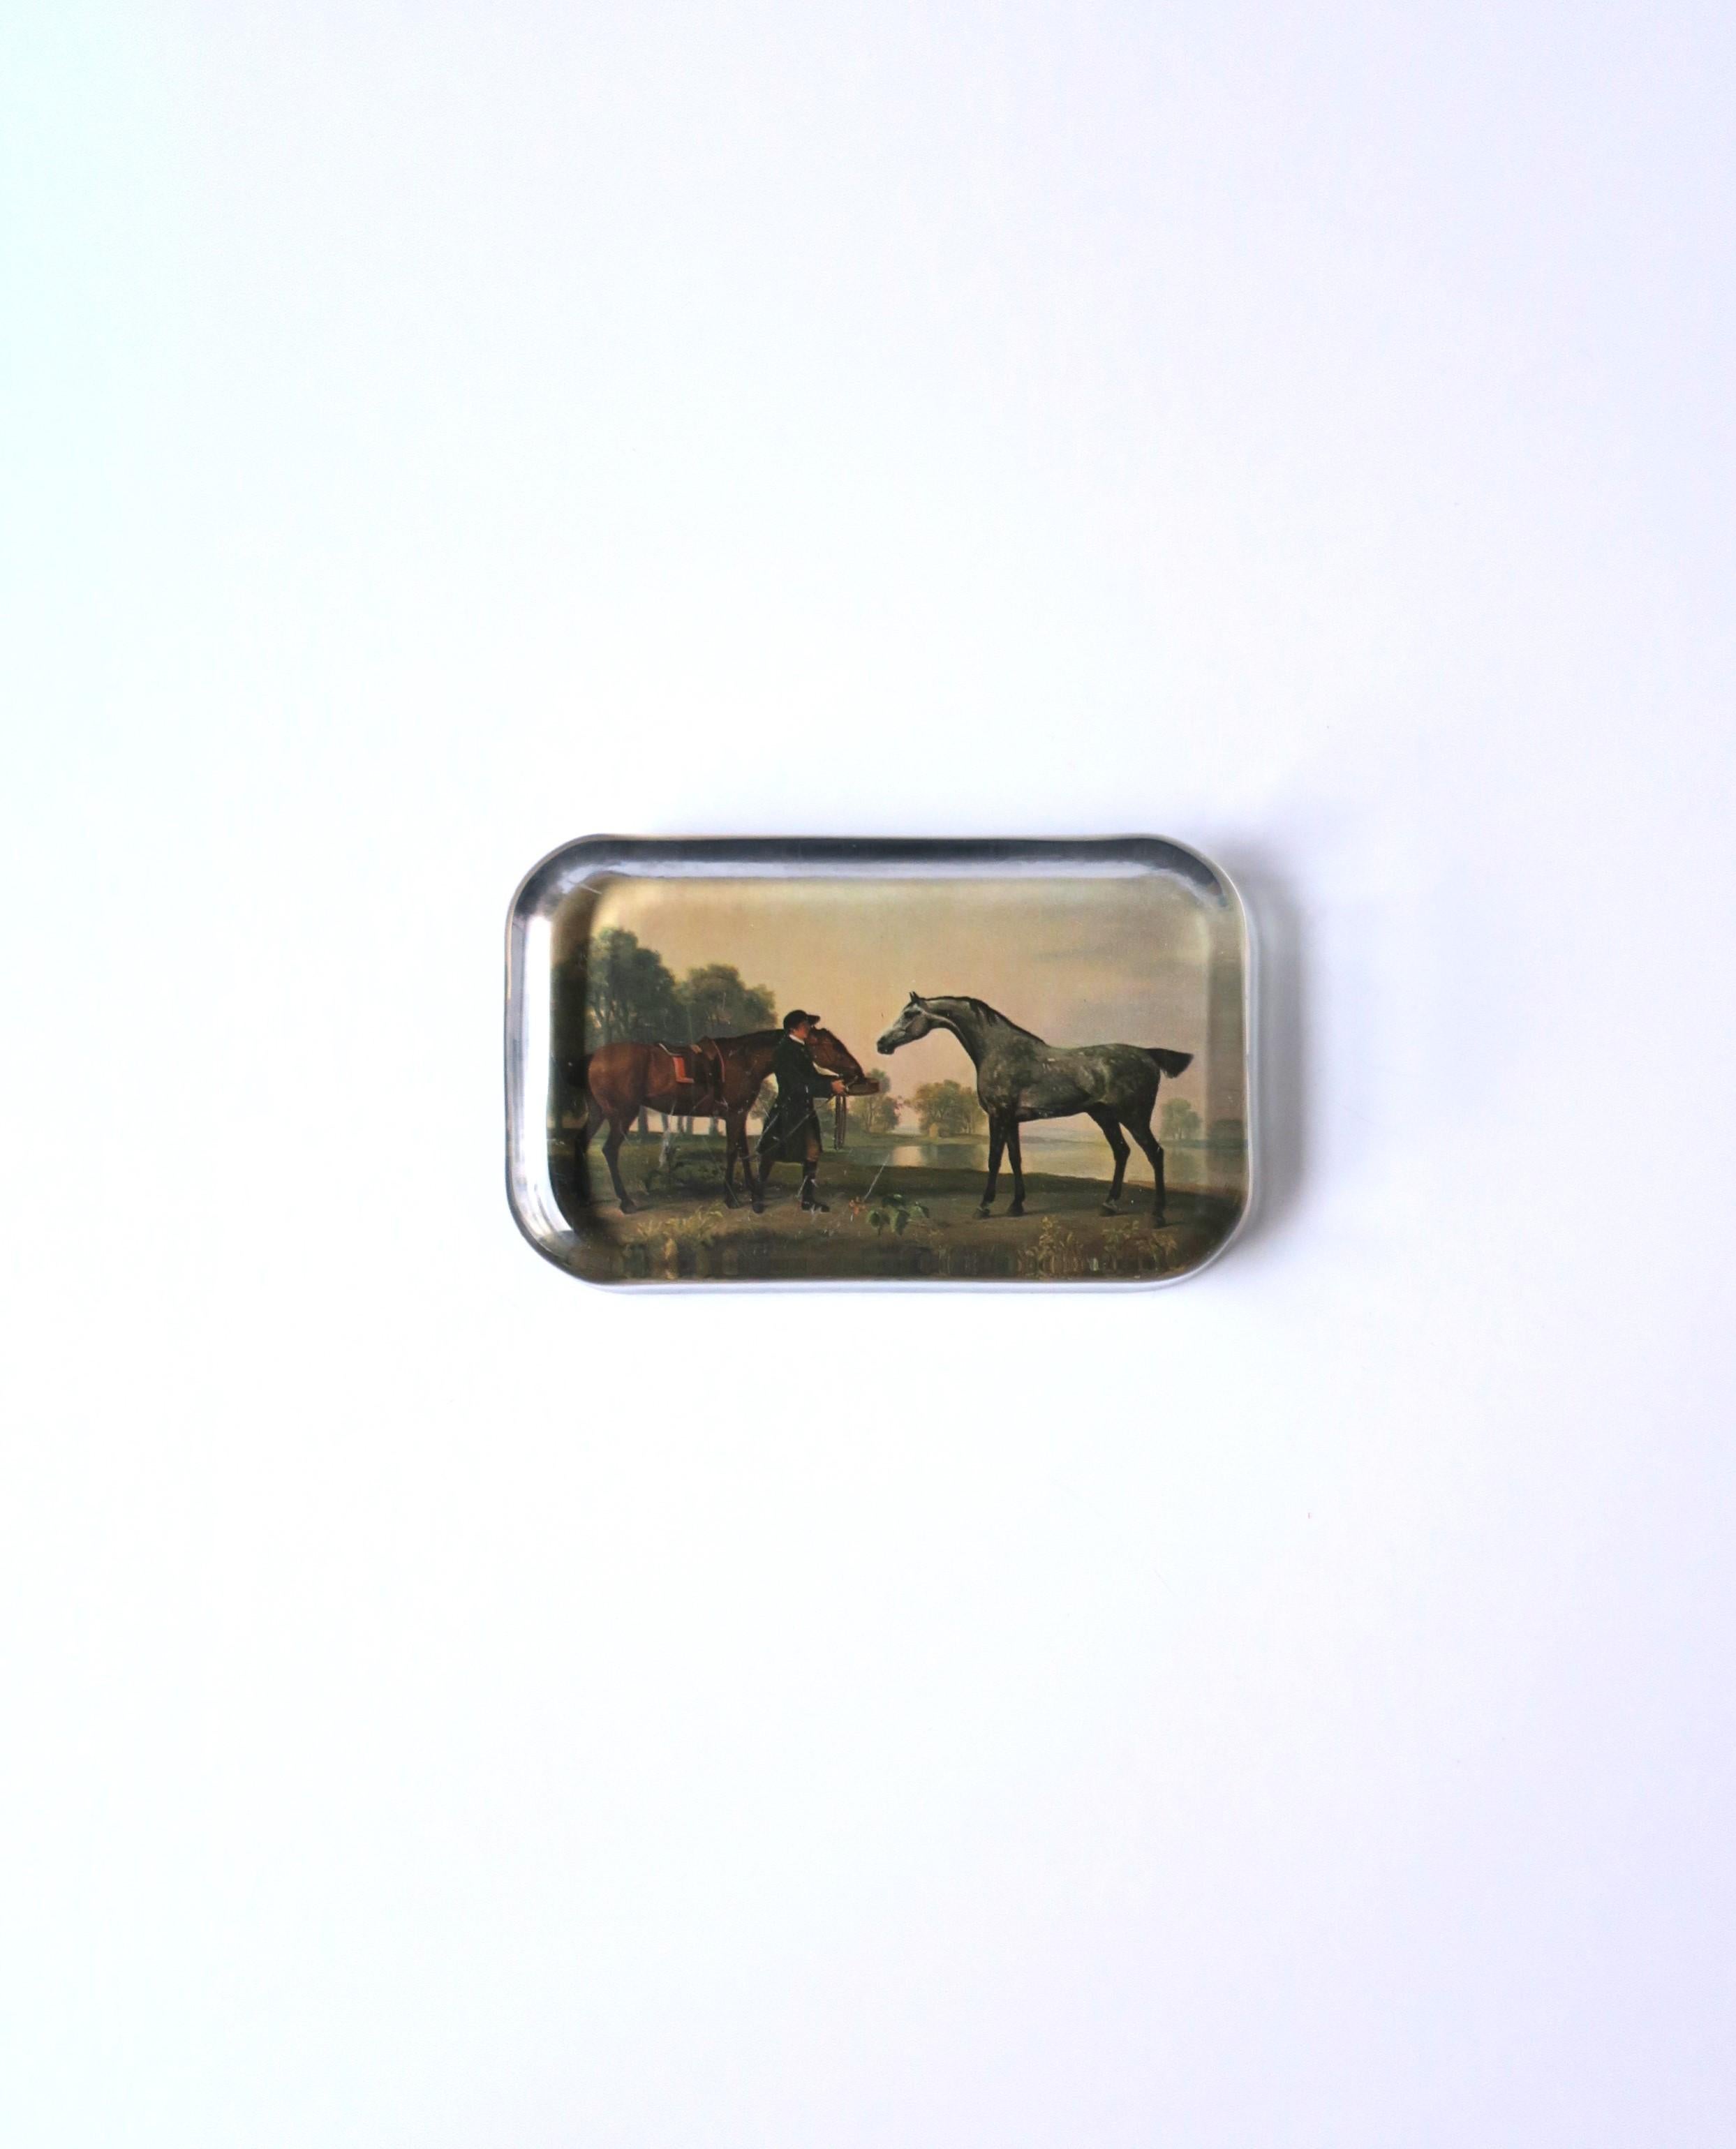 A glass and paper decoupage paperweight of an English country scene with horses, circa 1970s, Engand. A great piece for a desk, library, side/end table, etc. Dimensions: 2.63